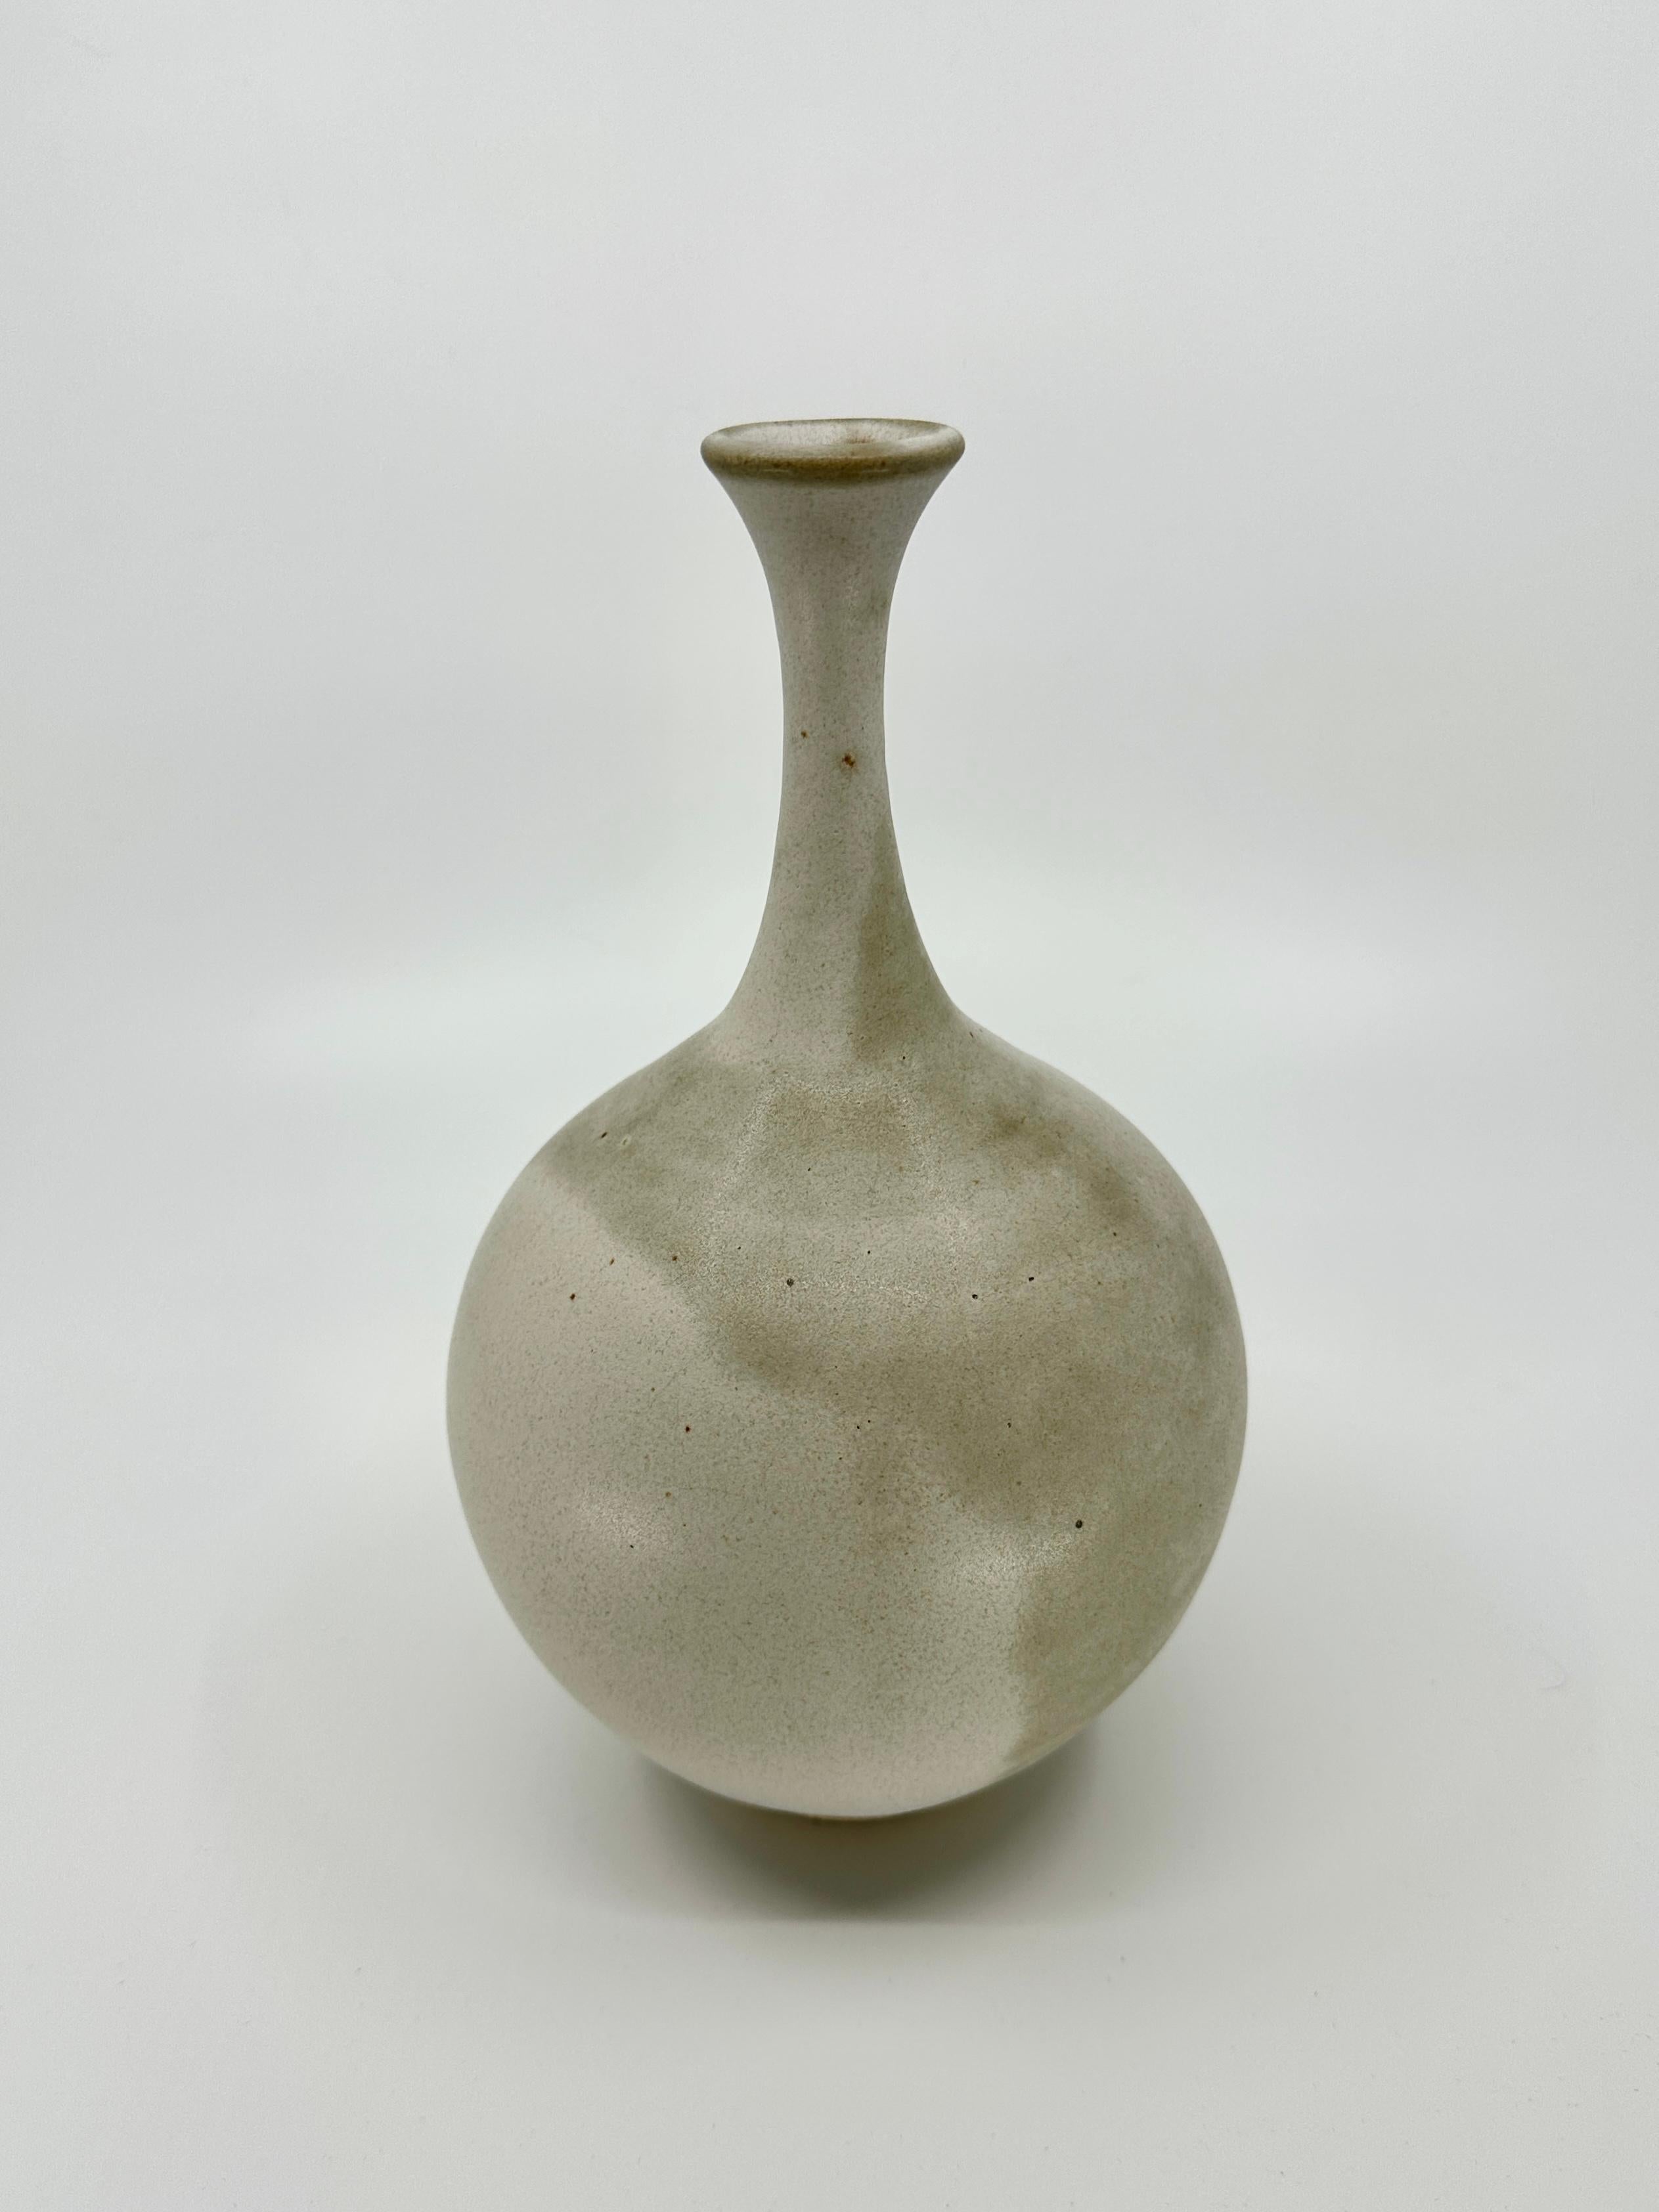 Wheel-thrown and hand-turned bottleneck vessel in beautiful gray/beige and cream colors with small spot of terra cotta color in the mouth. Handmade from light stoneware, this piece serves as a testament to the timeless beauty of heirloom pottery,